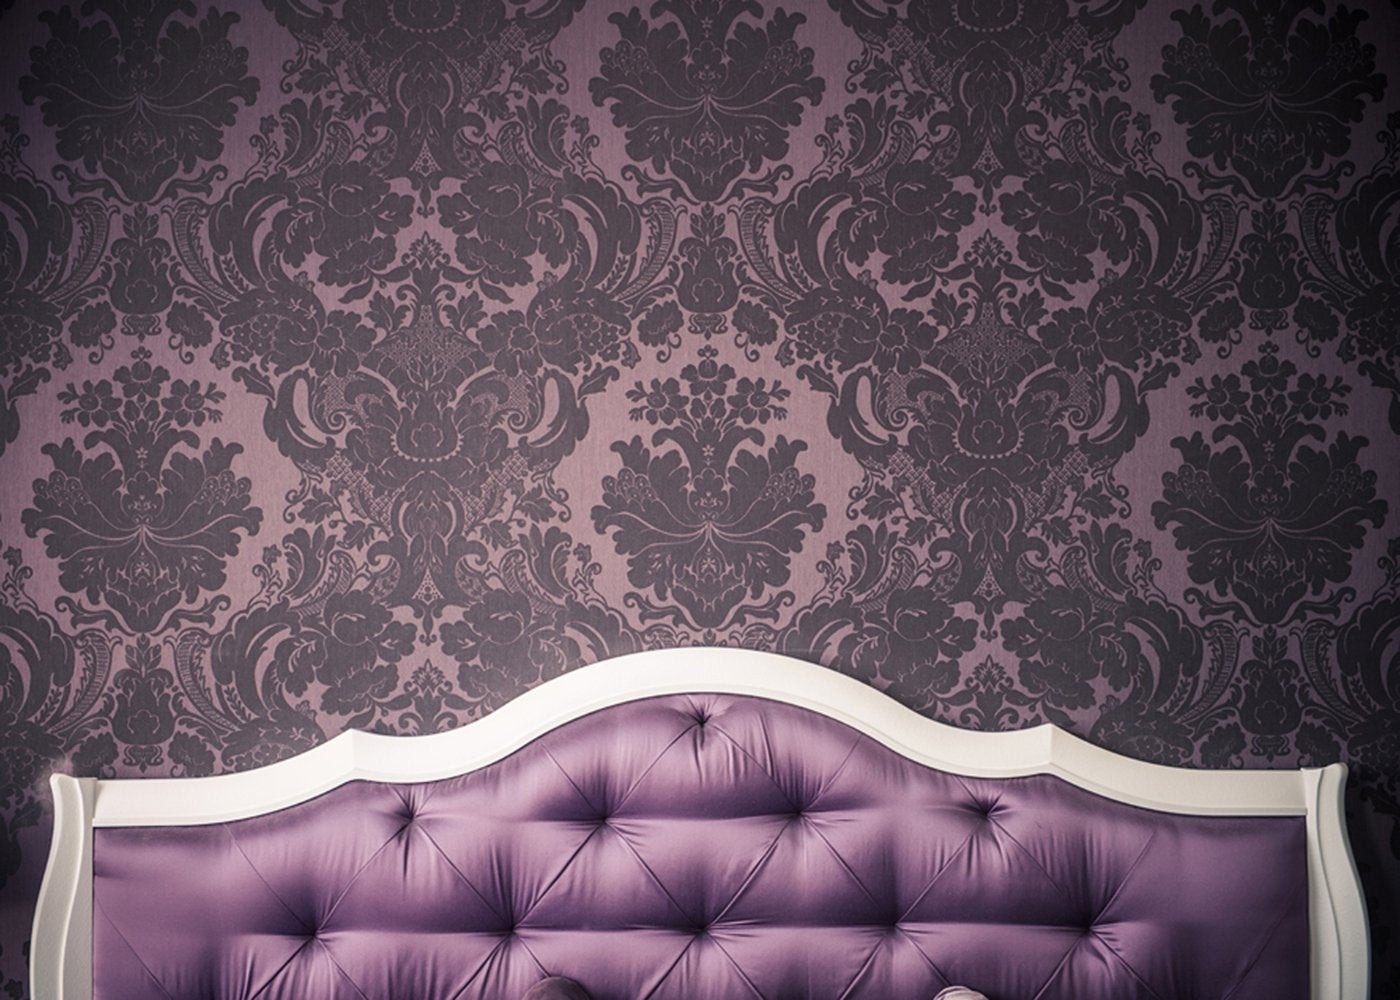 Katebackdrop：Purple Bed board and Wall for Photography